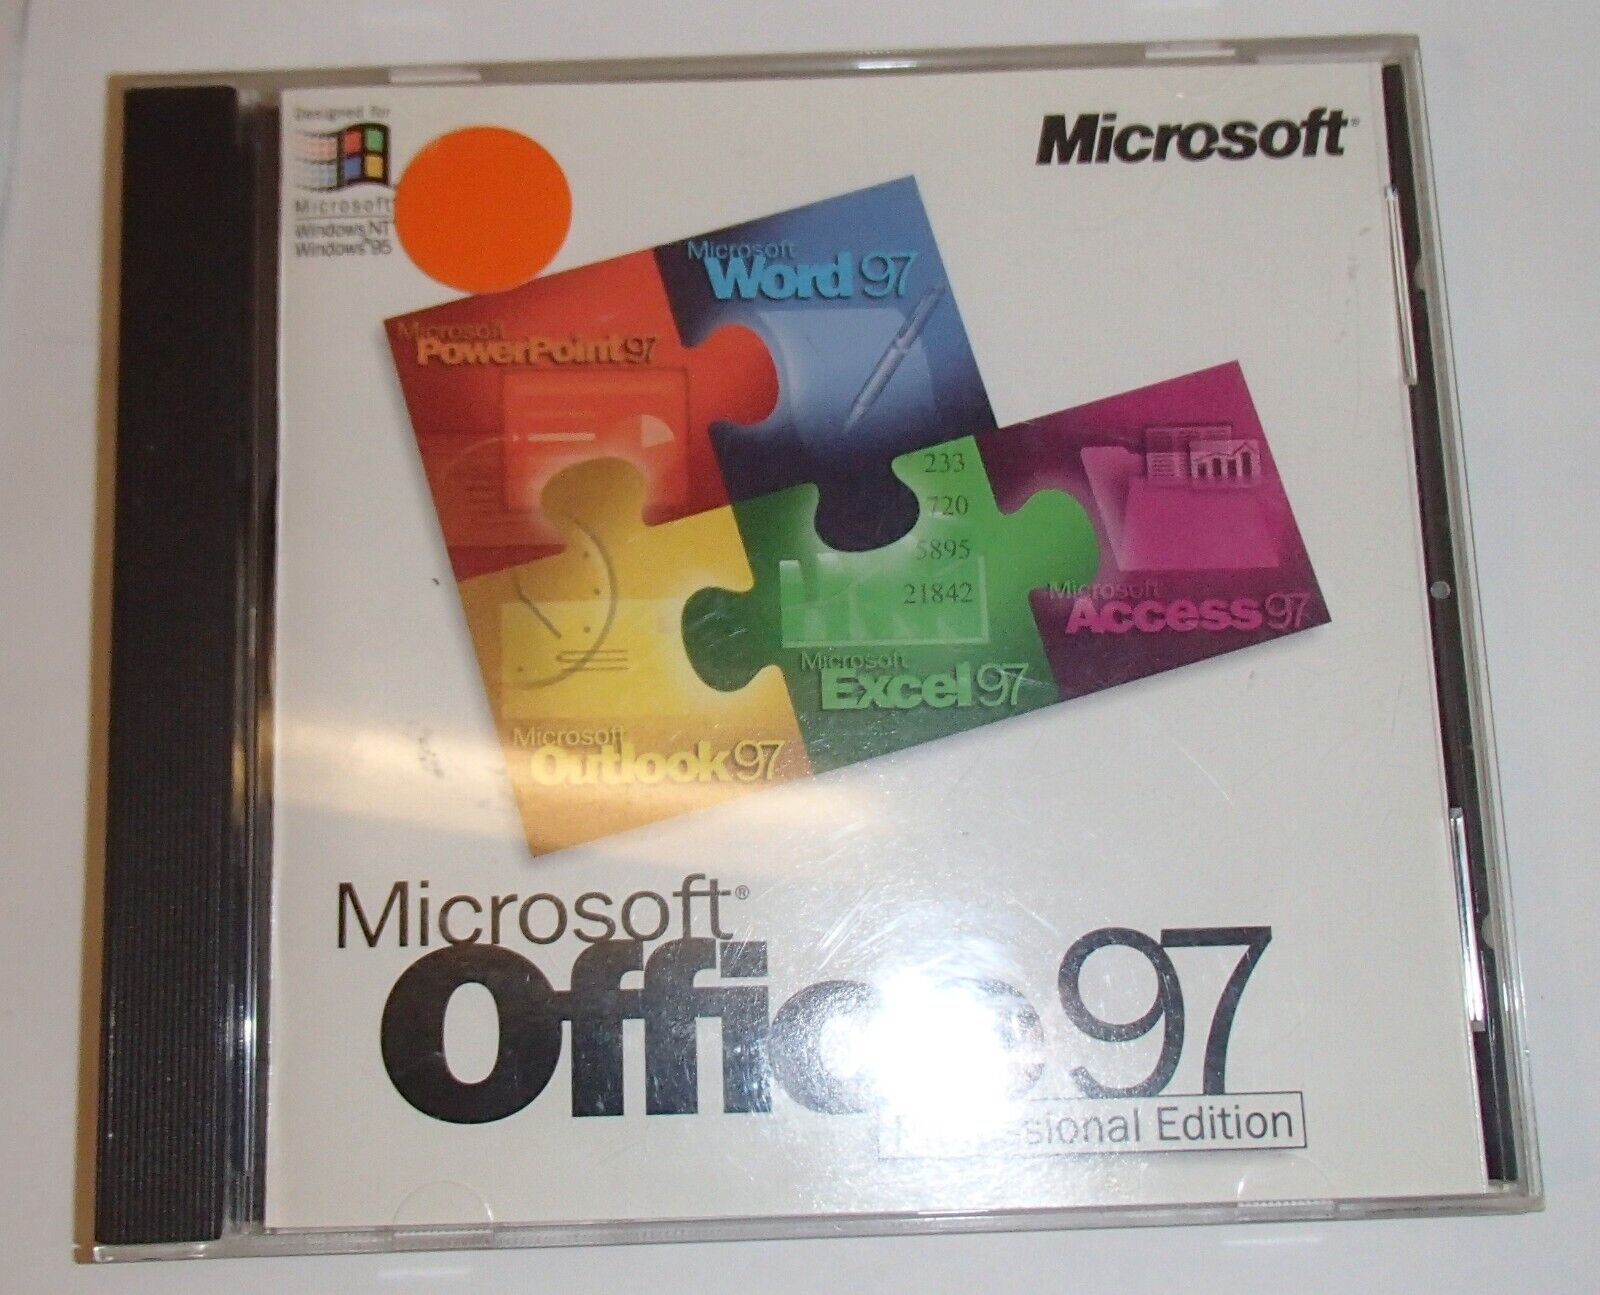 Microsoft Office 97 Professional Edition with CD Key